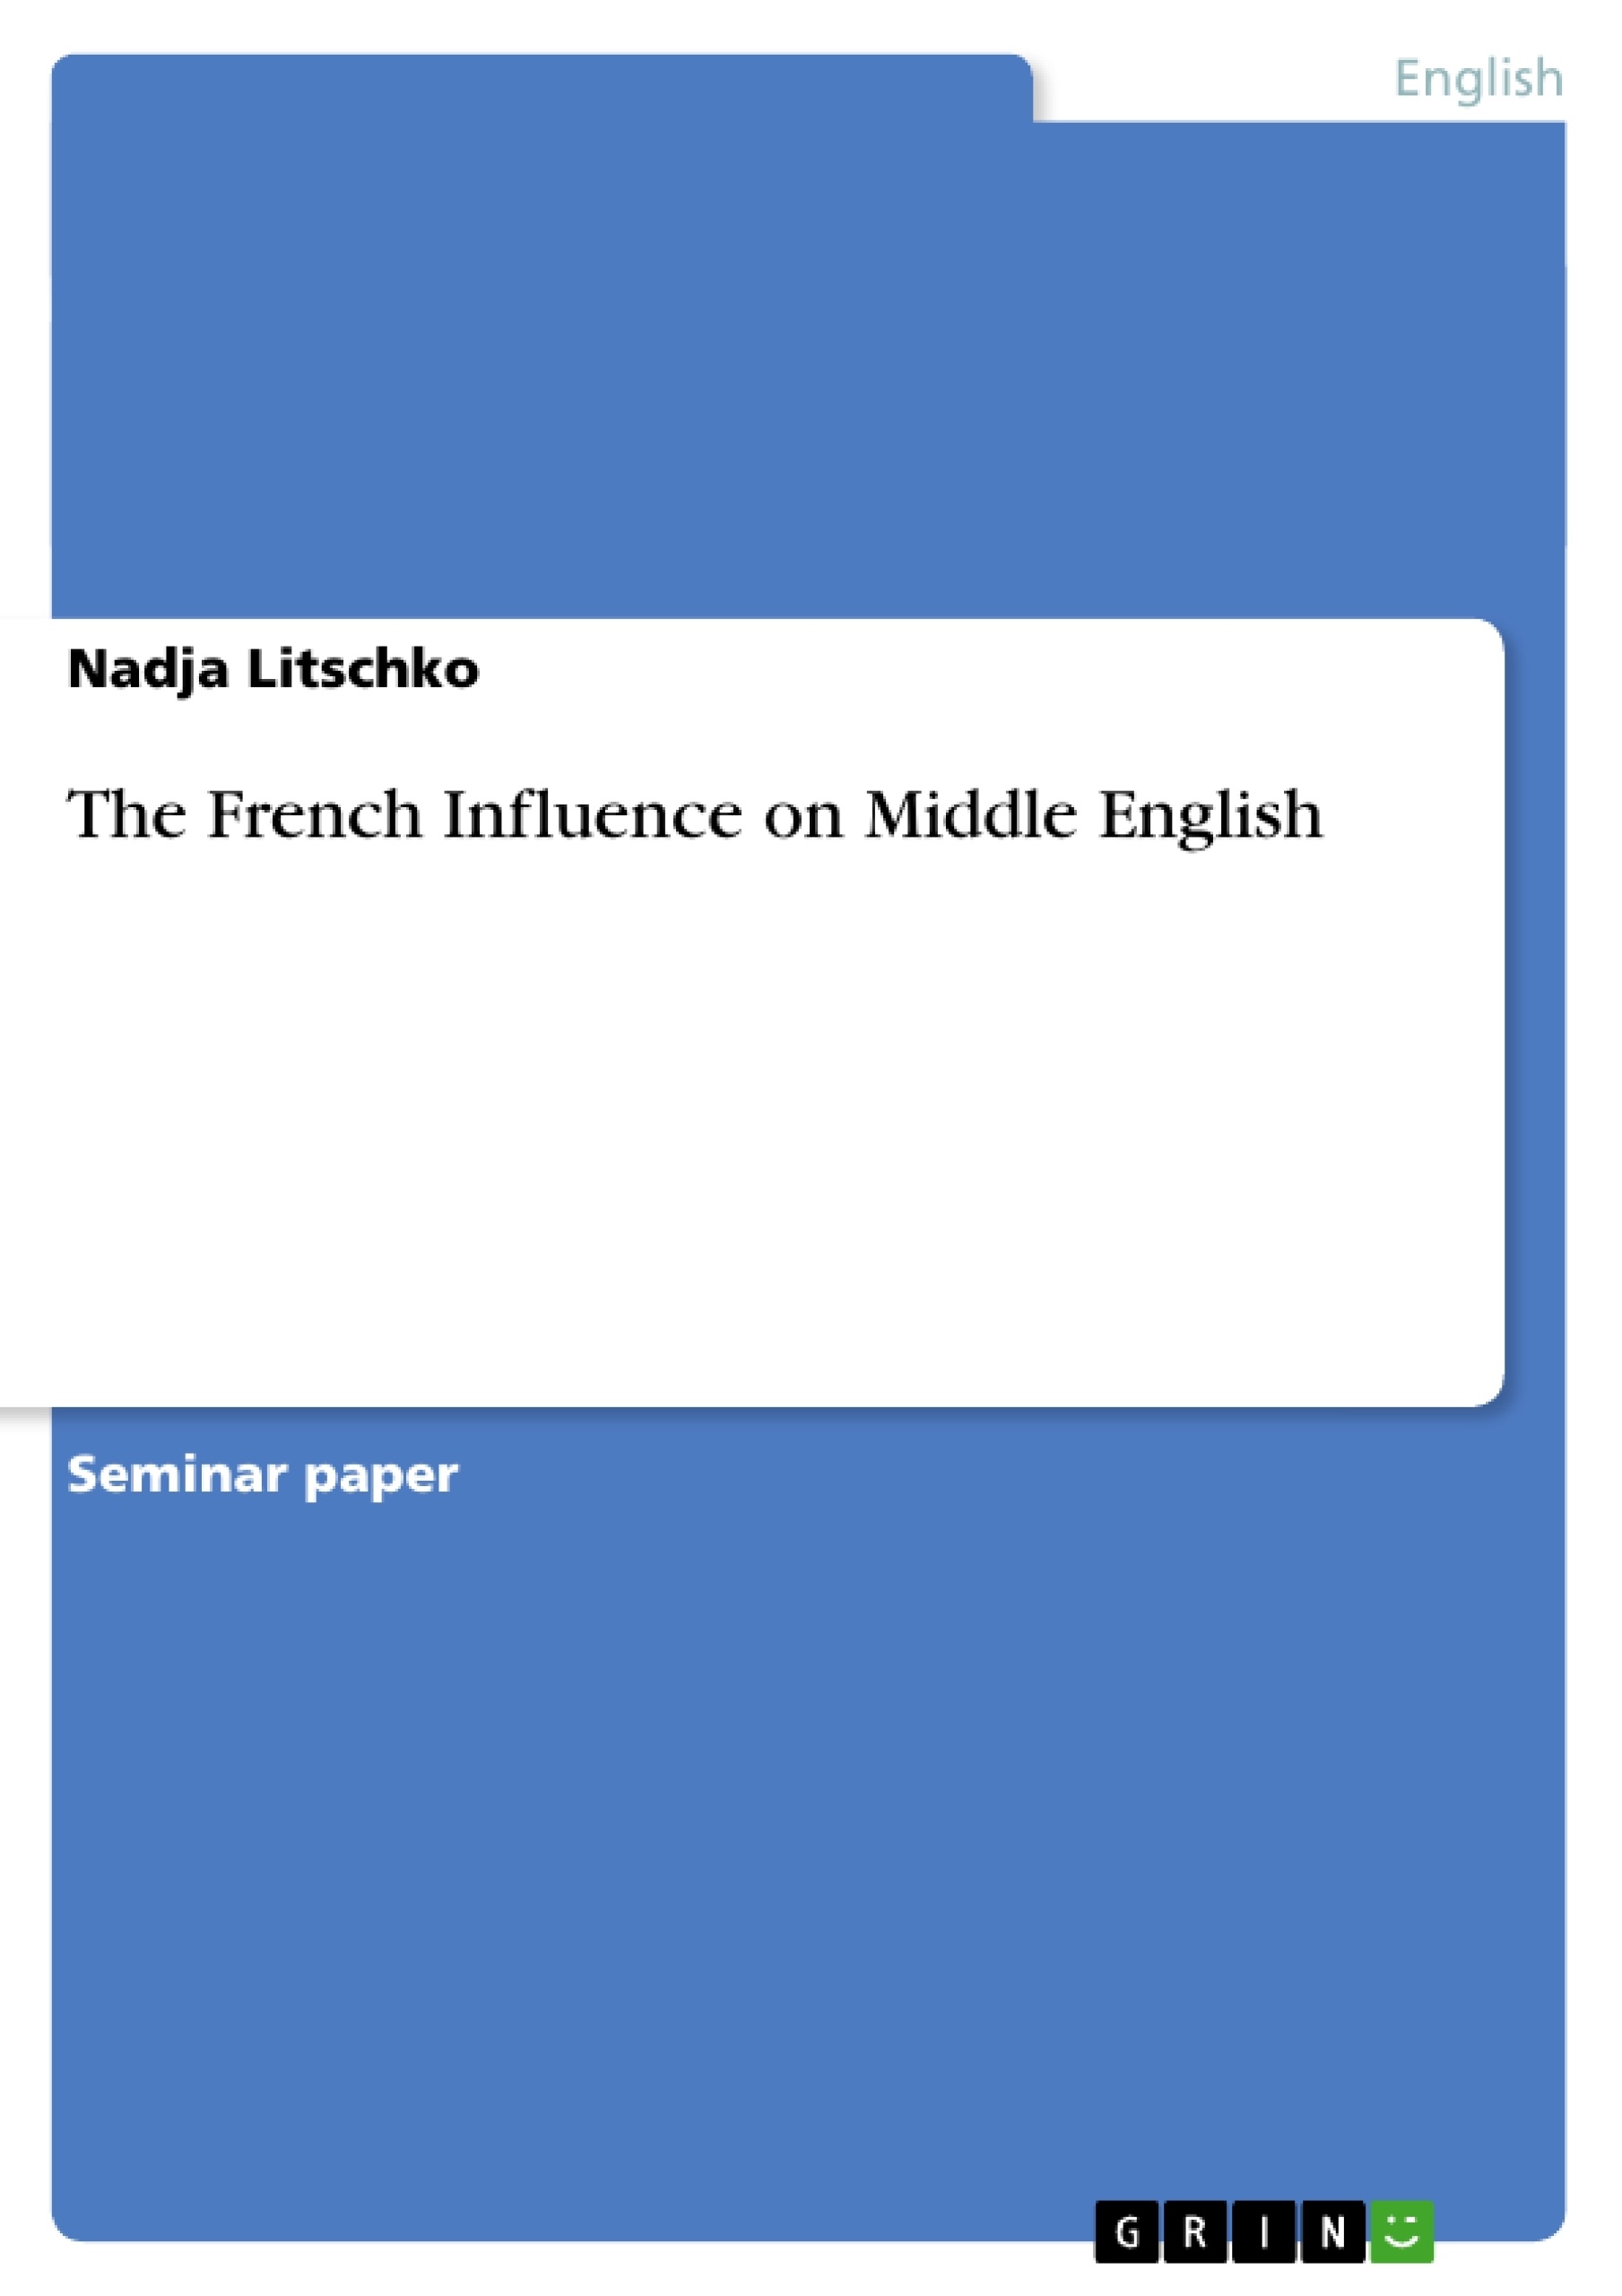 Title: The French Influence on Middle English